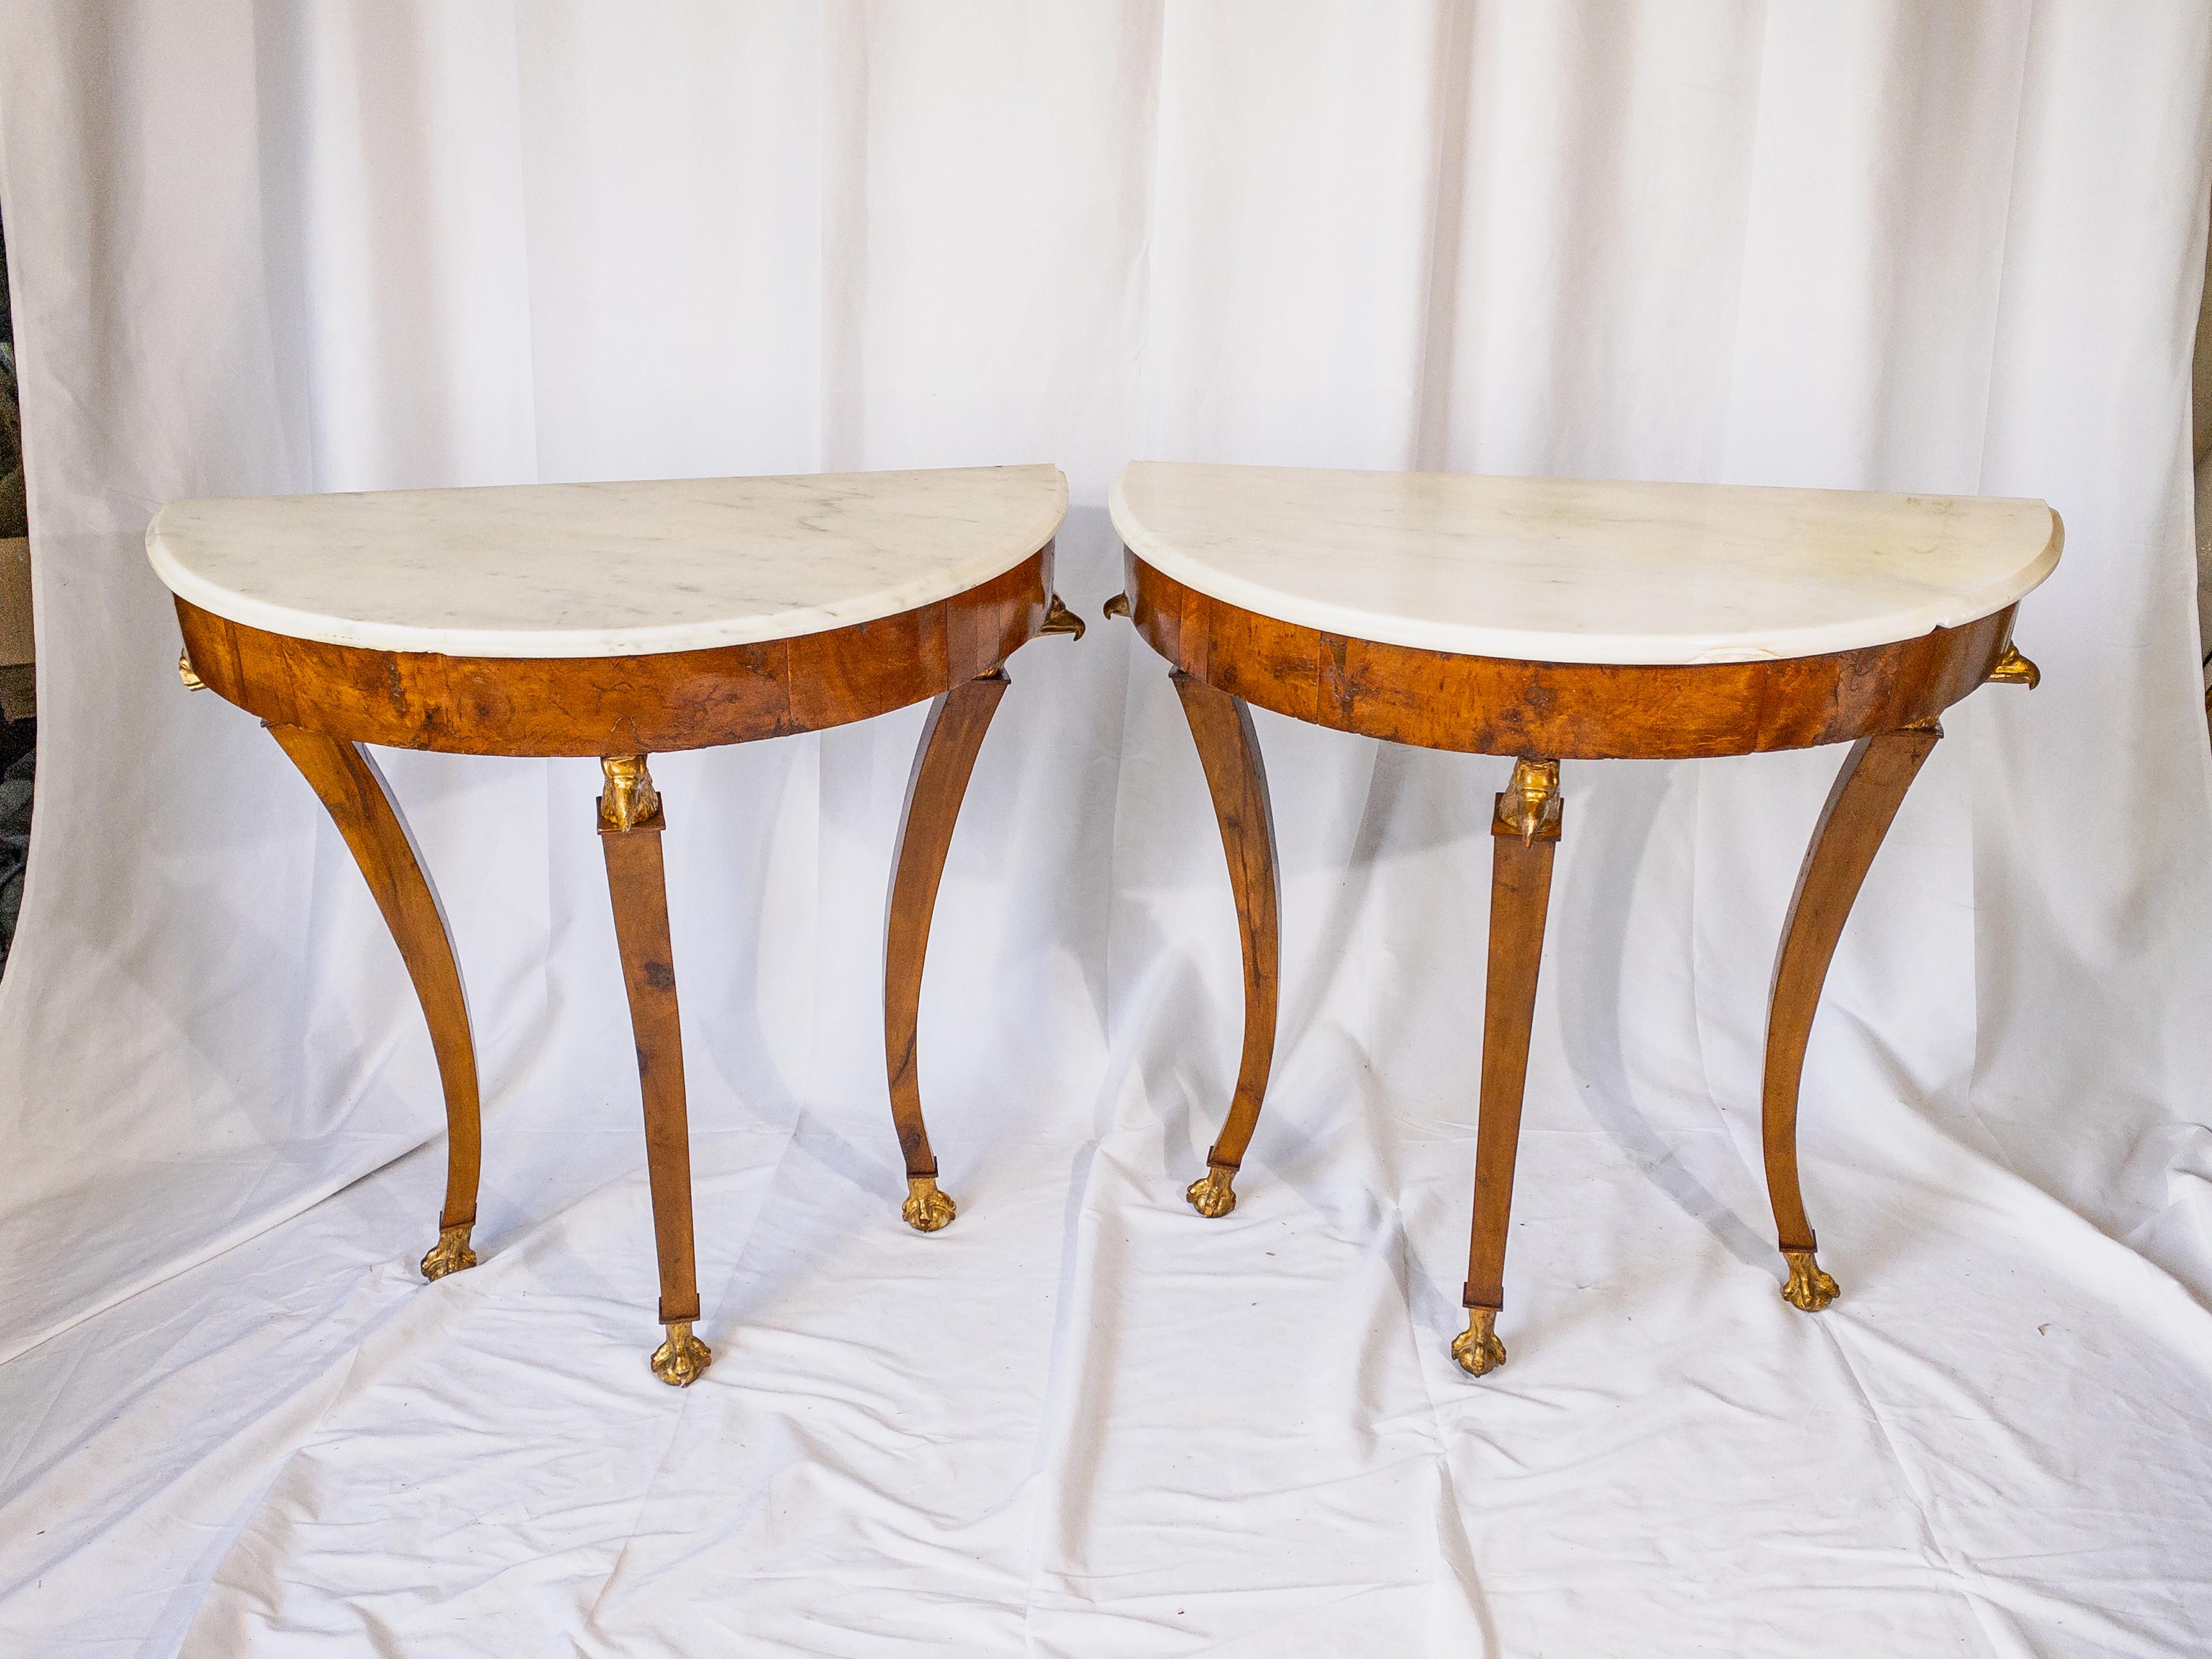 Carved Pair of 18th Century Italian Marble Top Demi-lune Tables For Sale